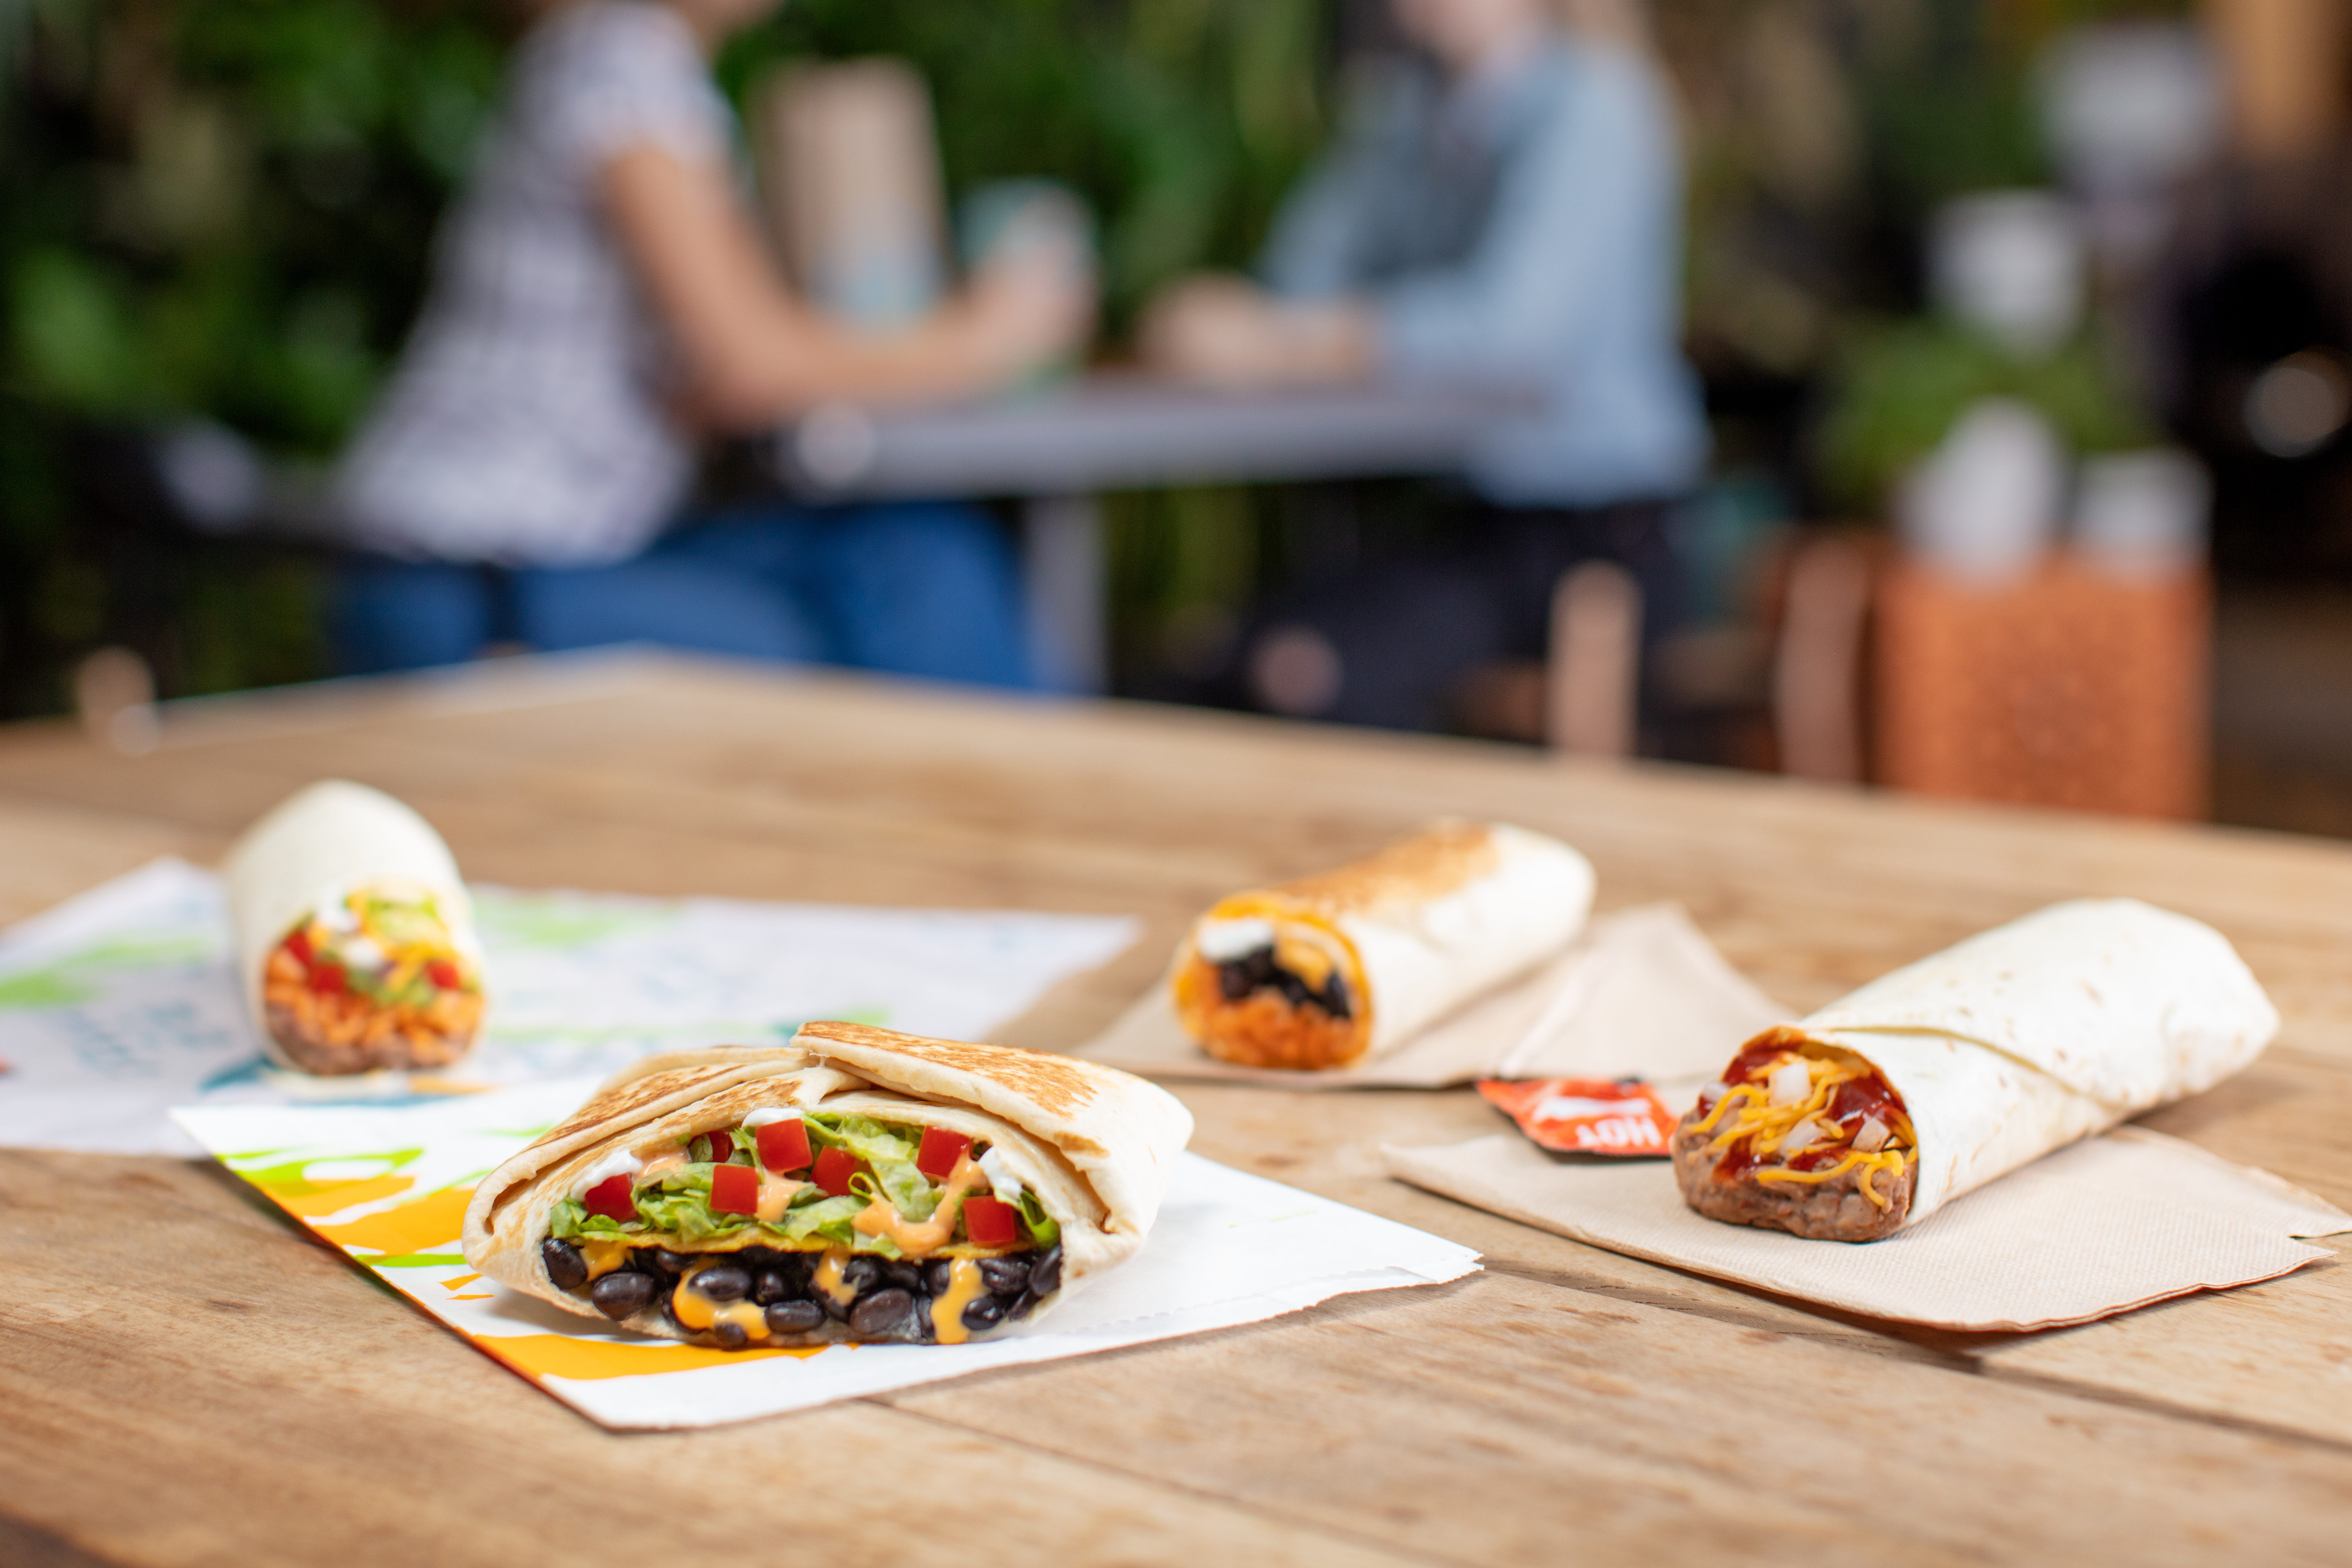 Taco Bell vegetarian menu and new items launch Sept. 12 nationwide